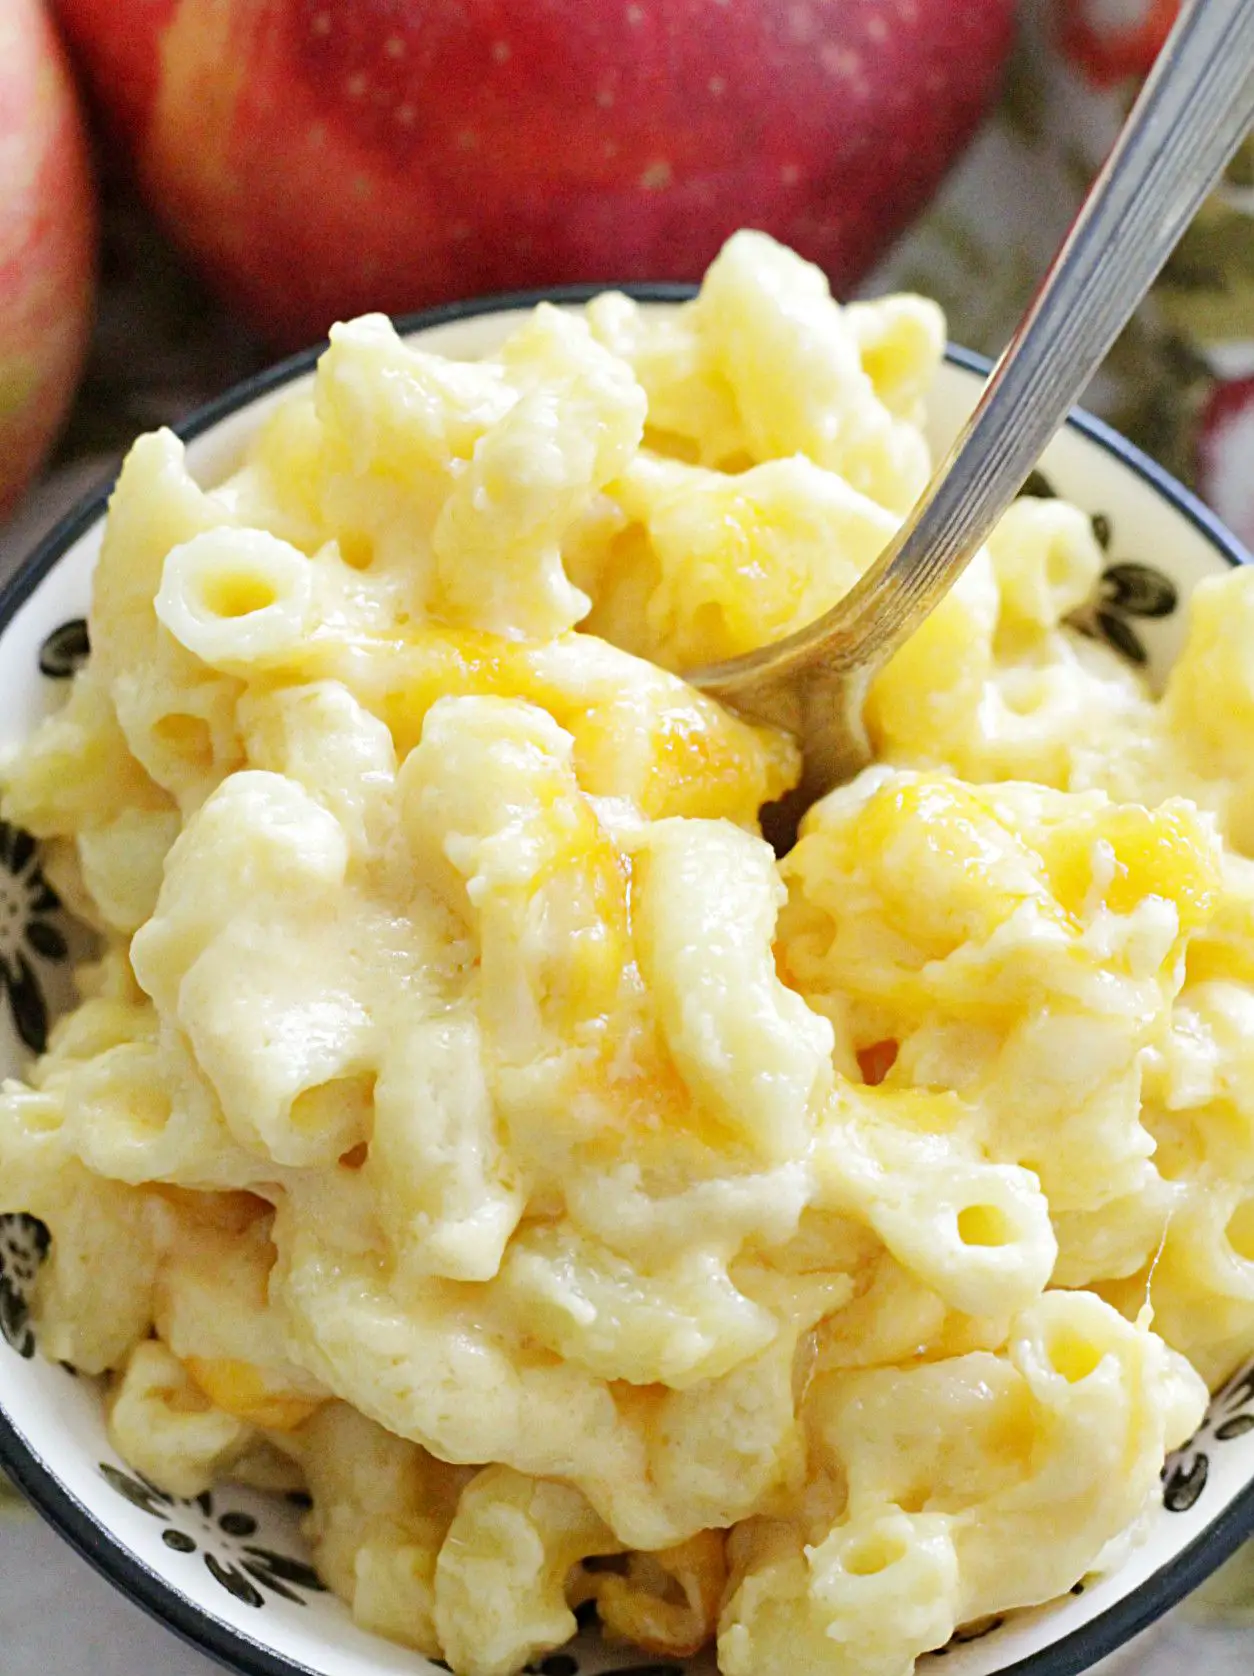 I call this an oven baked macaroni and cheese recipe because the oven ...